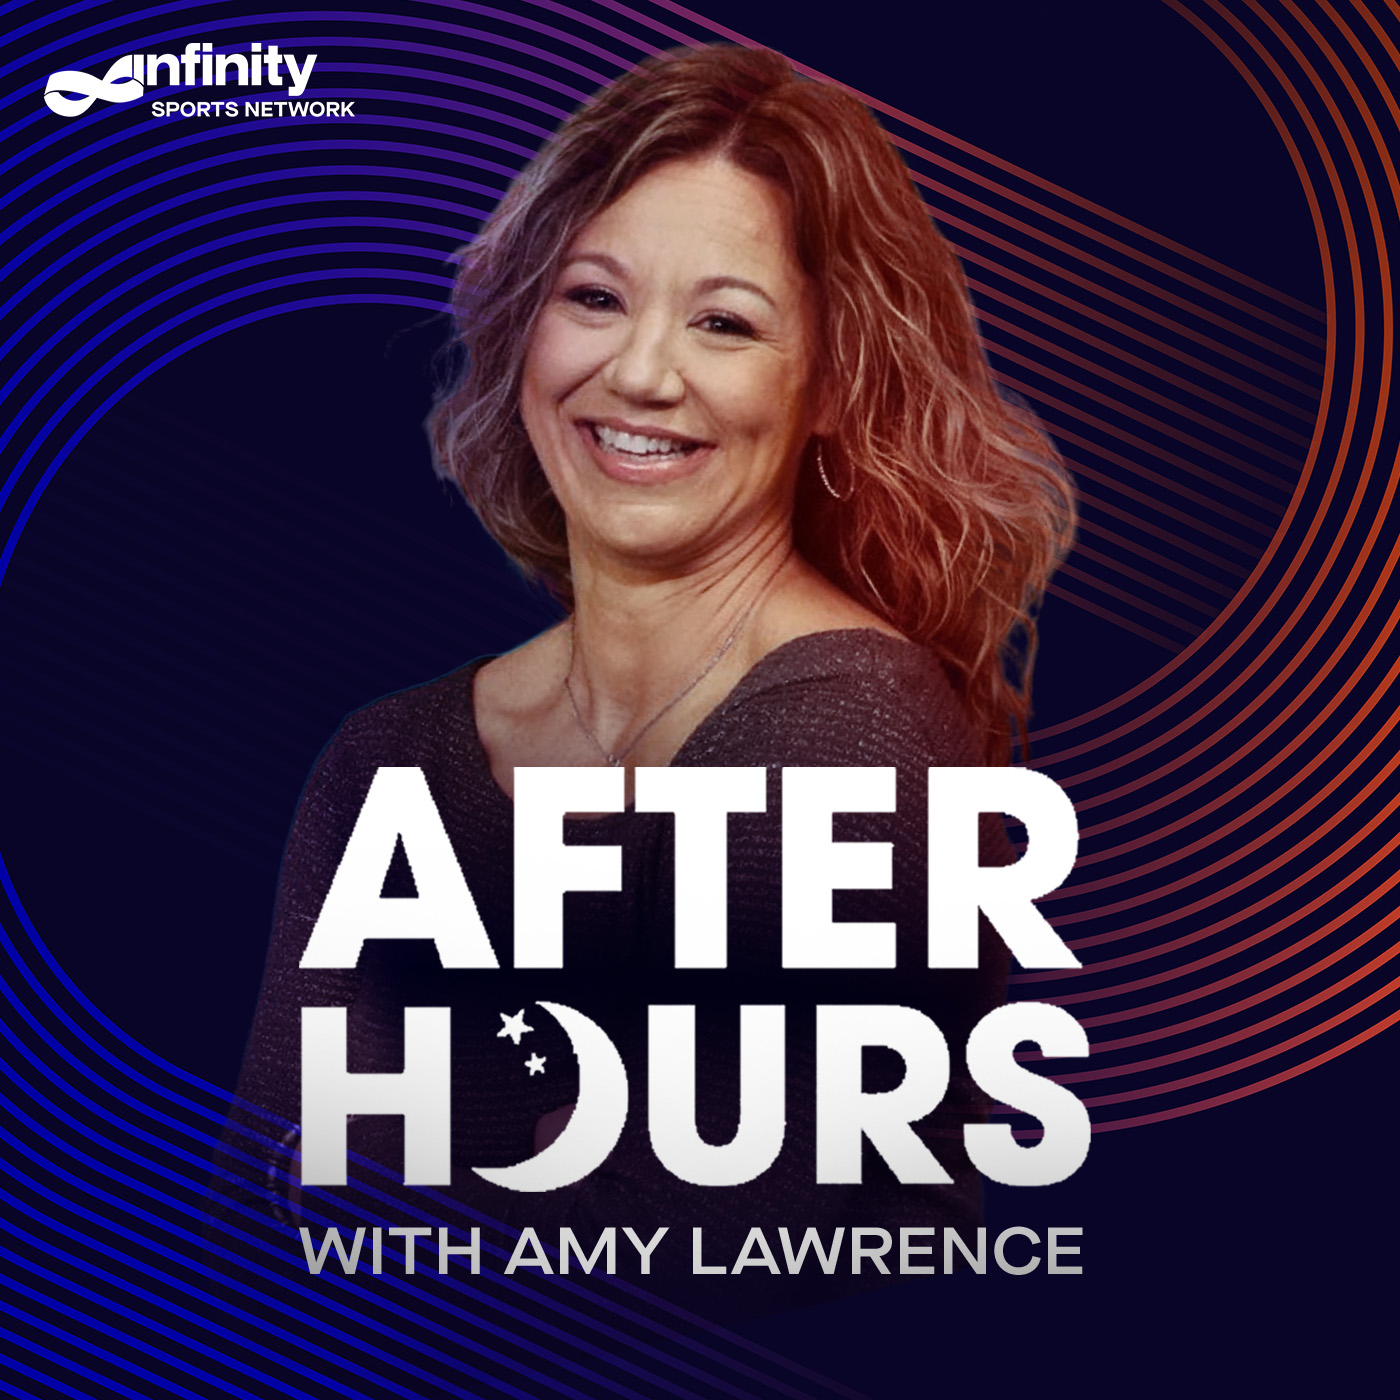 1-6-22 After Hours with Amy Lawrence PODCAST: Hour 4